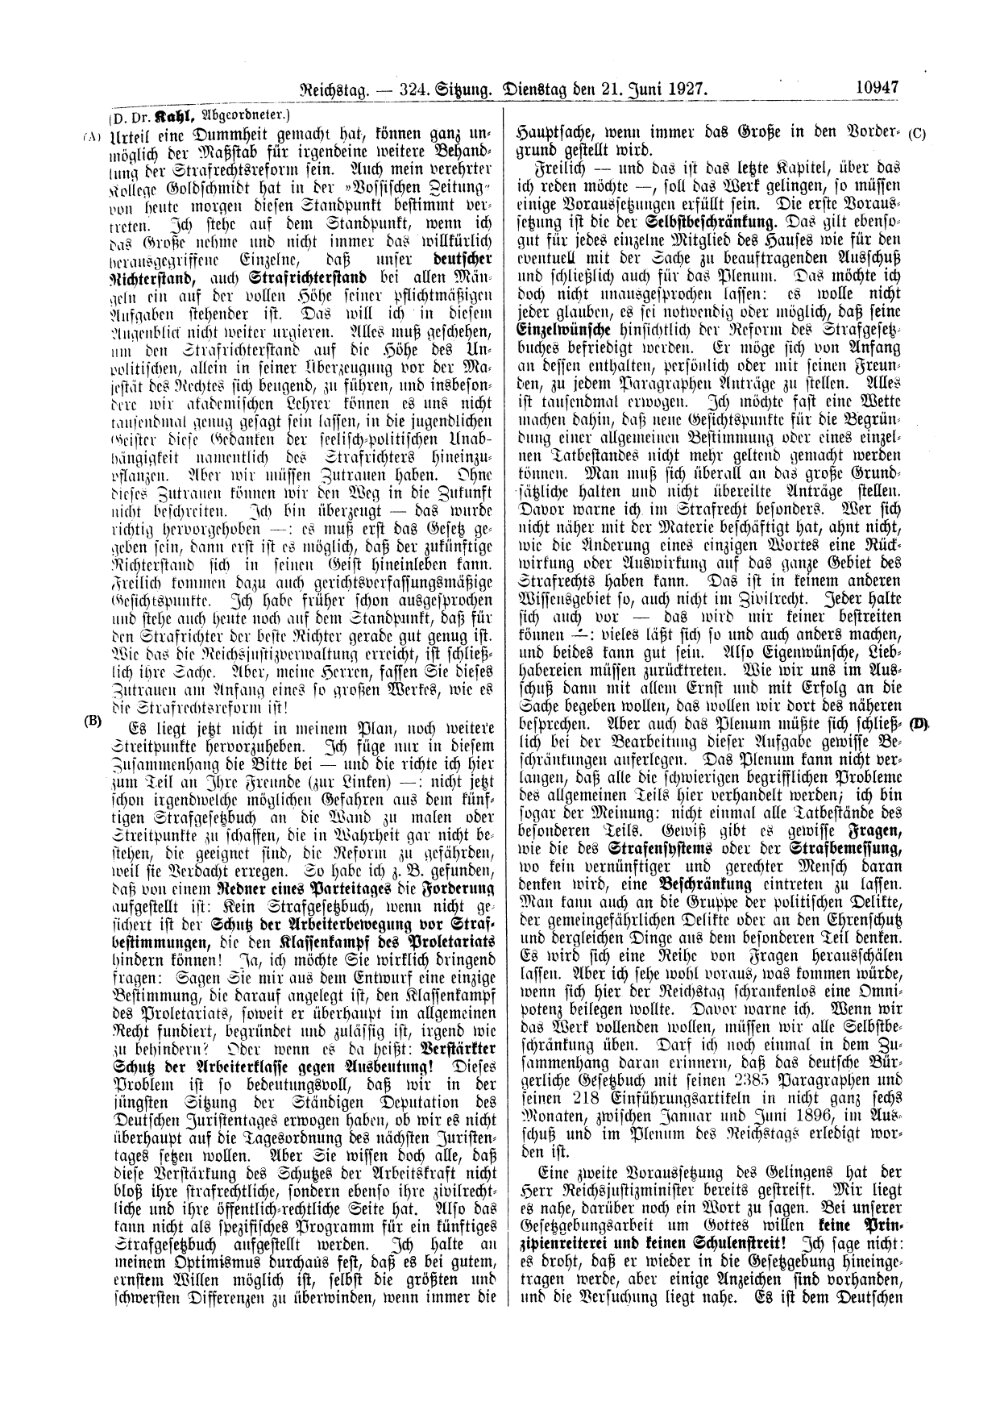 Scan of page 10947